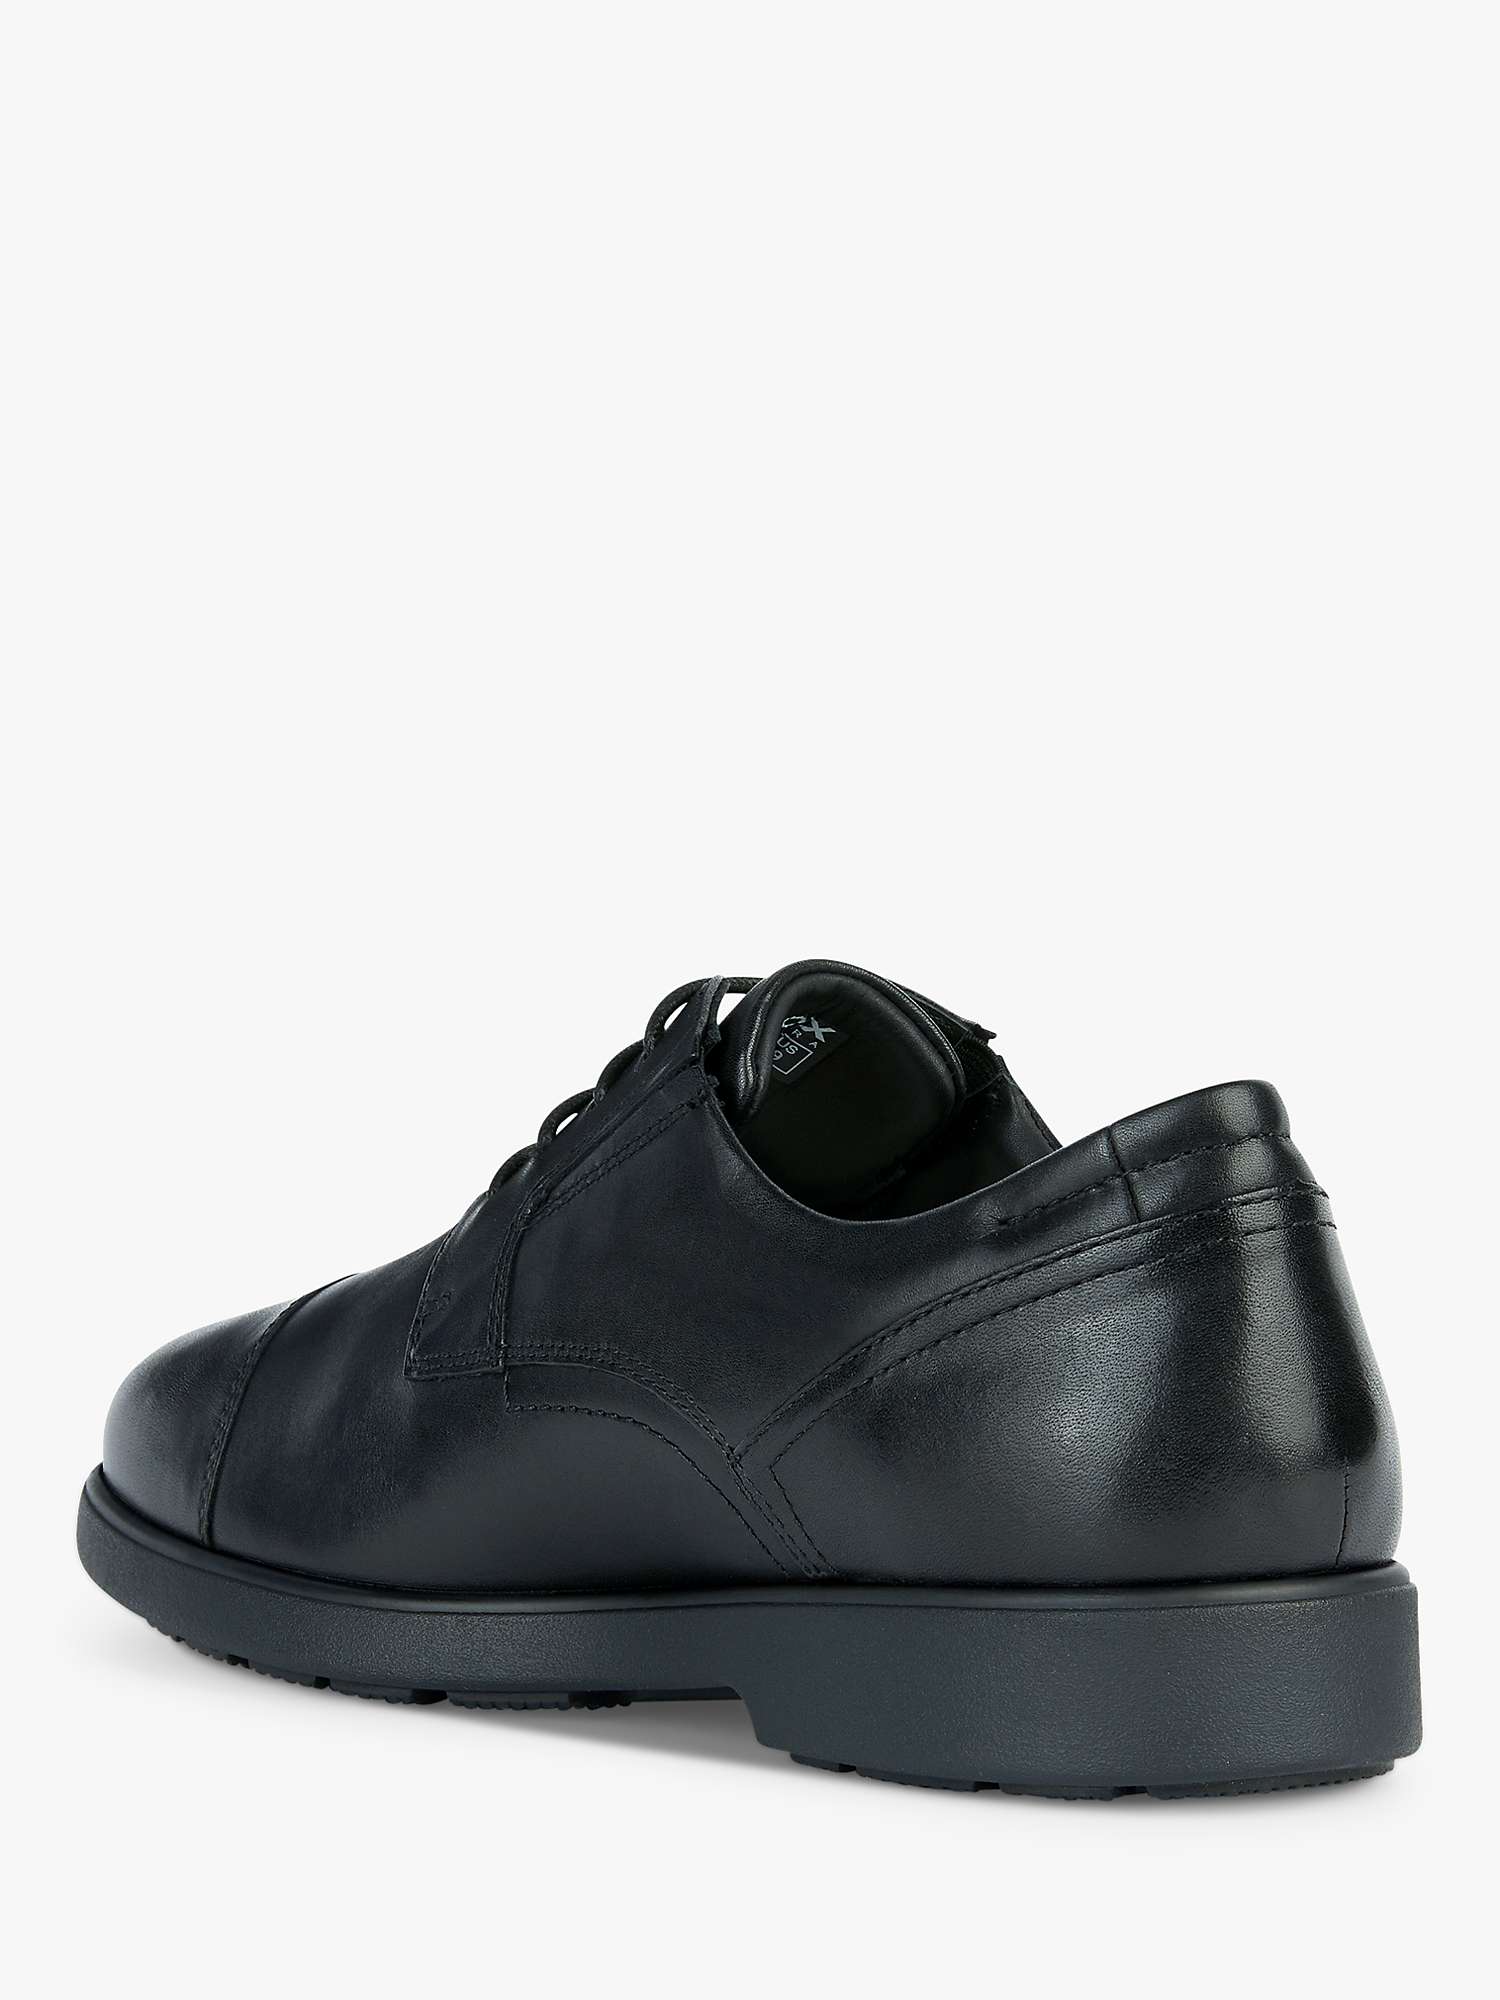 Buy Geox Spherica EC11 Leather Oxford Shoes Online at johnlewis.com